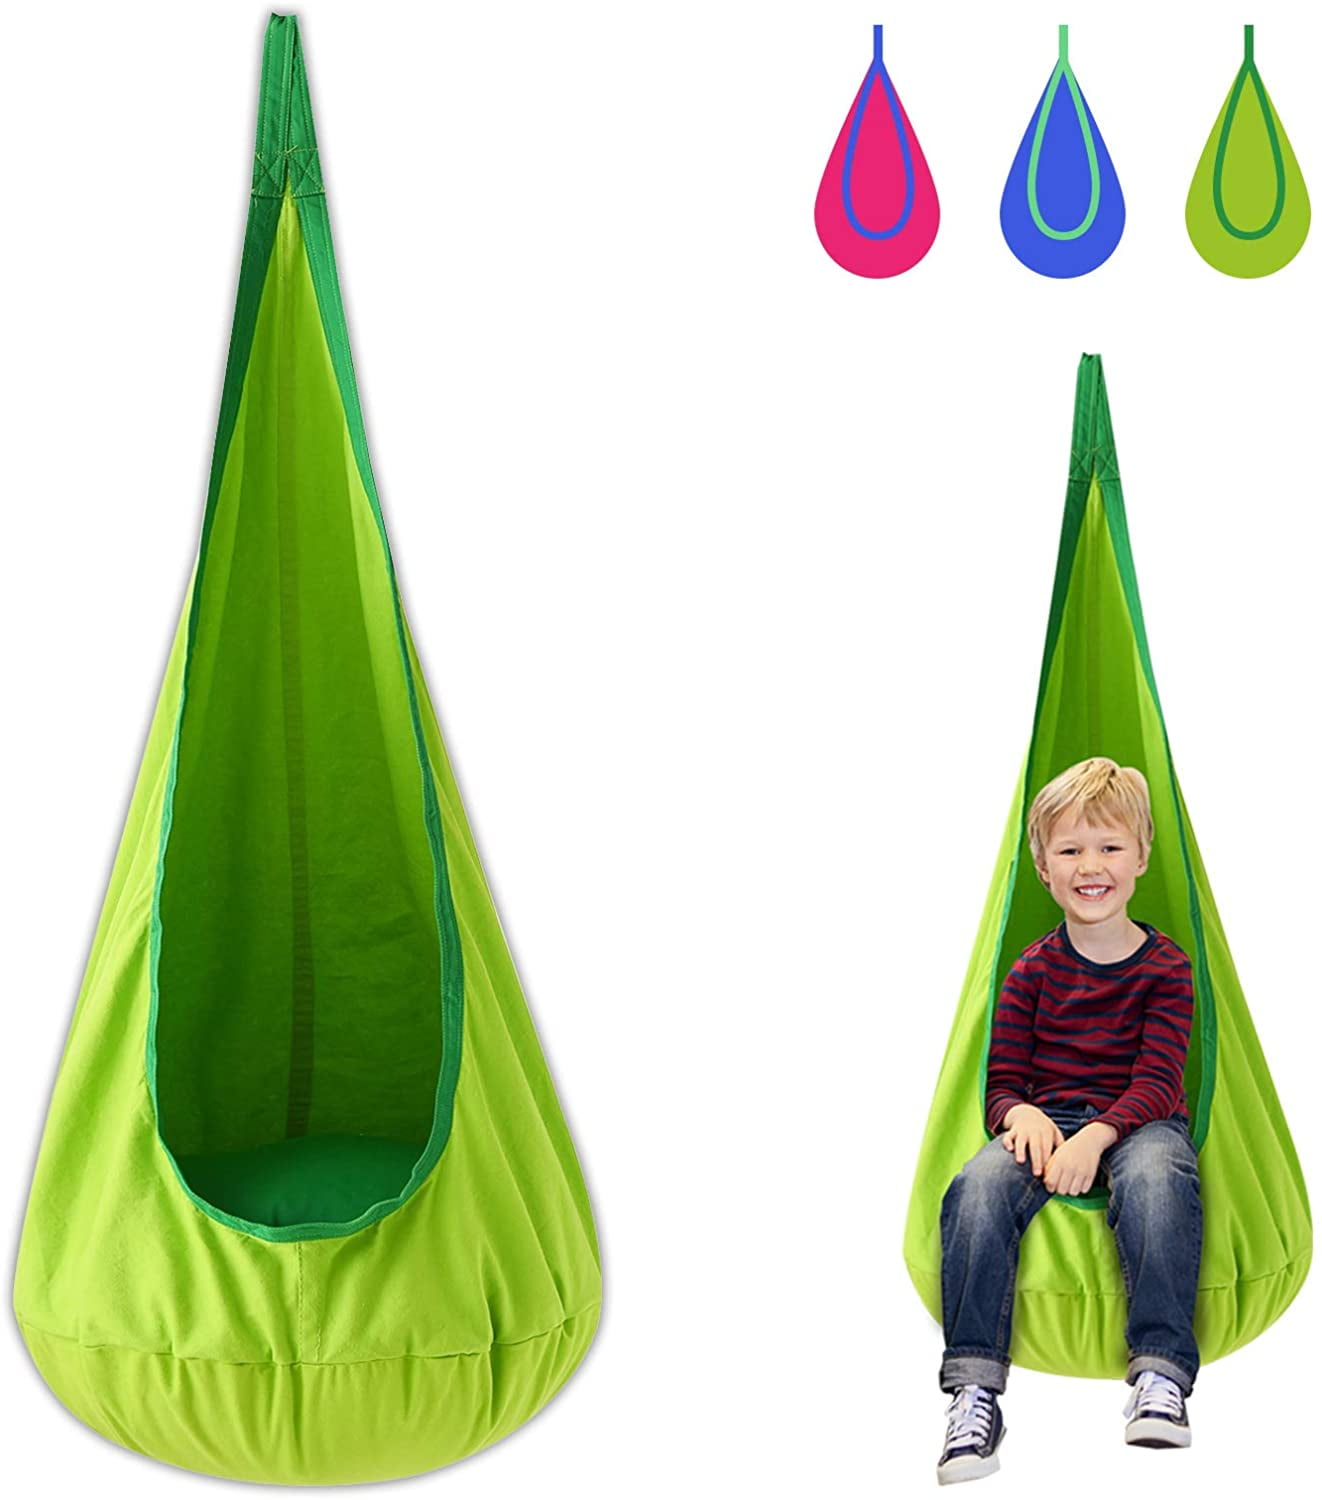 Hanging Pod Swing Seat Cotton Child Hammock Chair w/ Cushion for Indoor Outdoor 